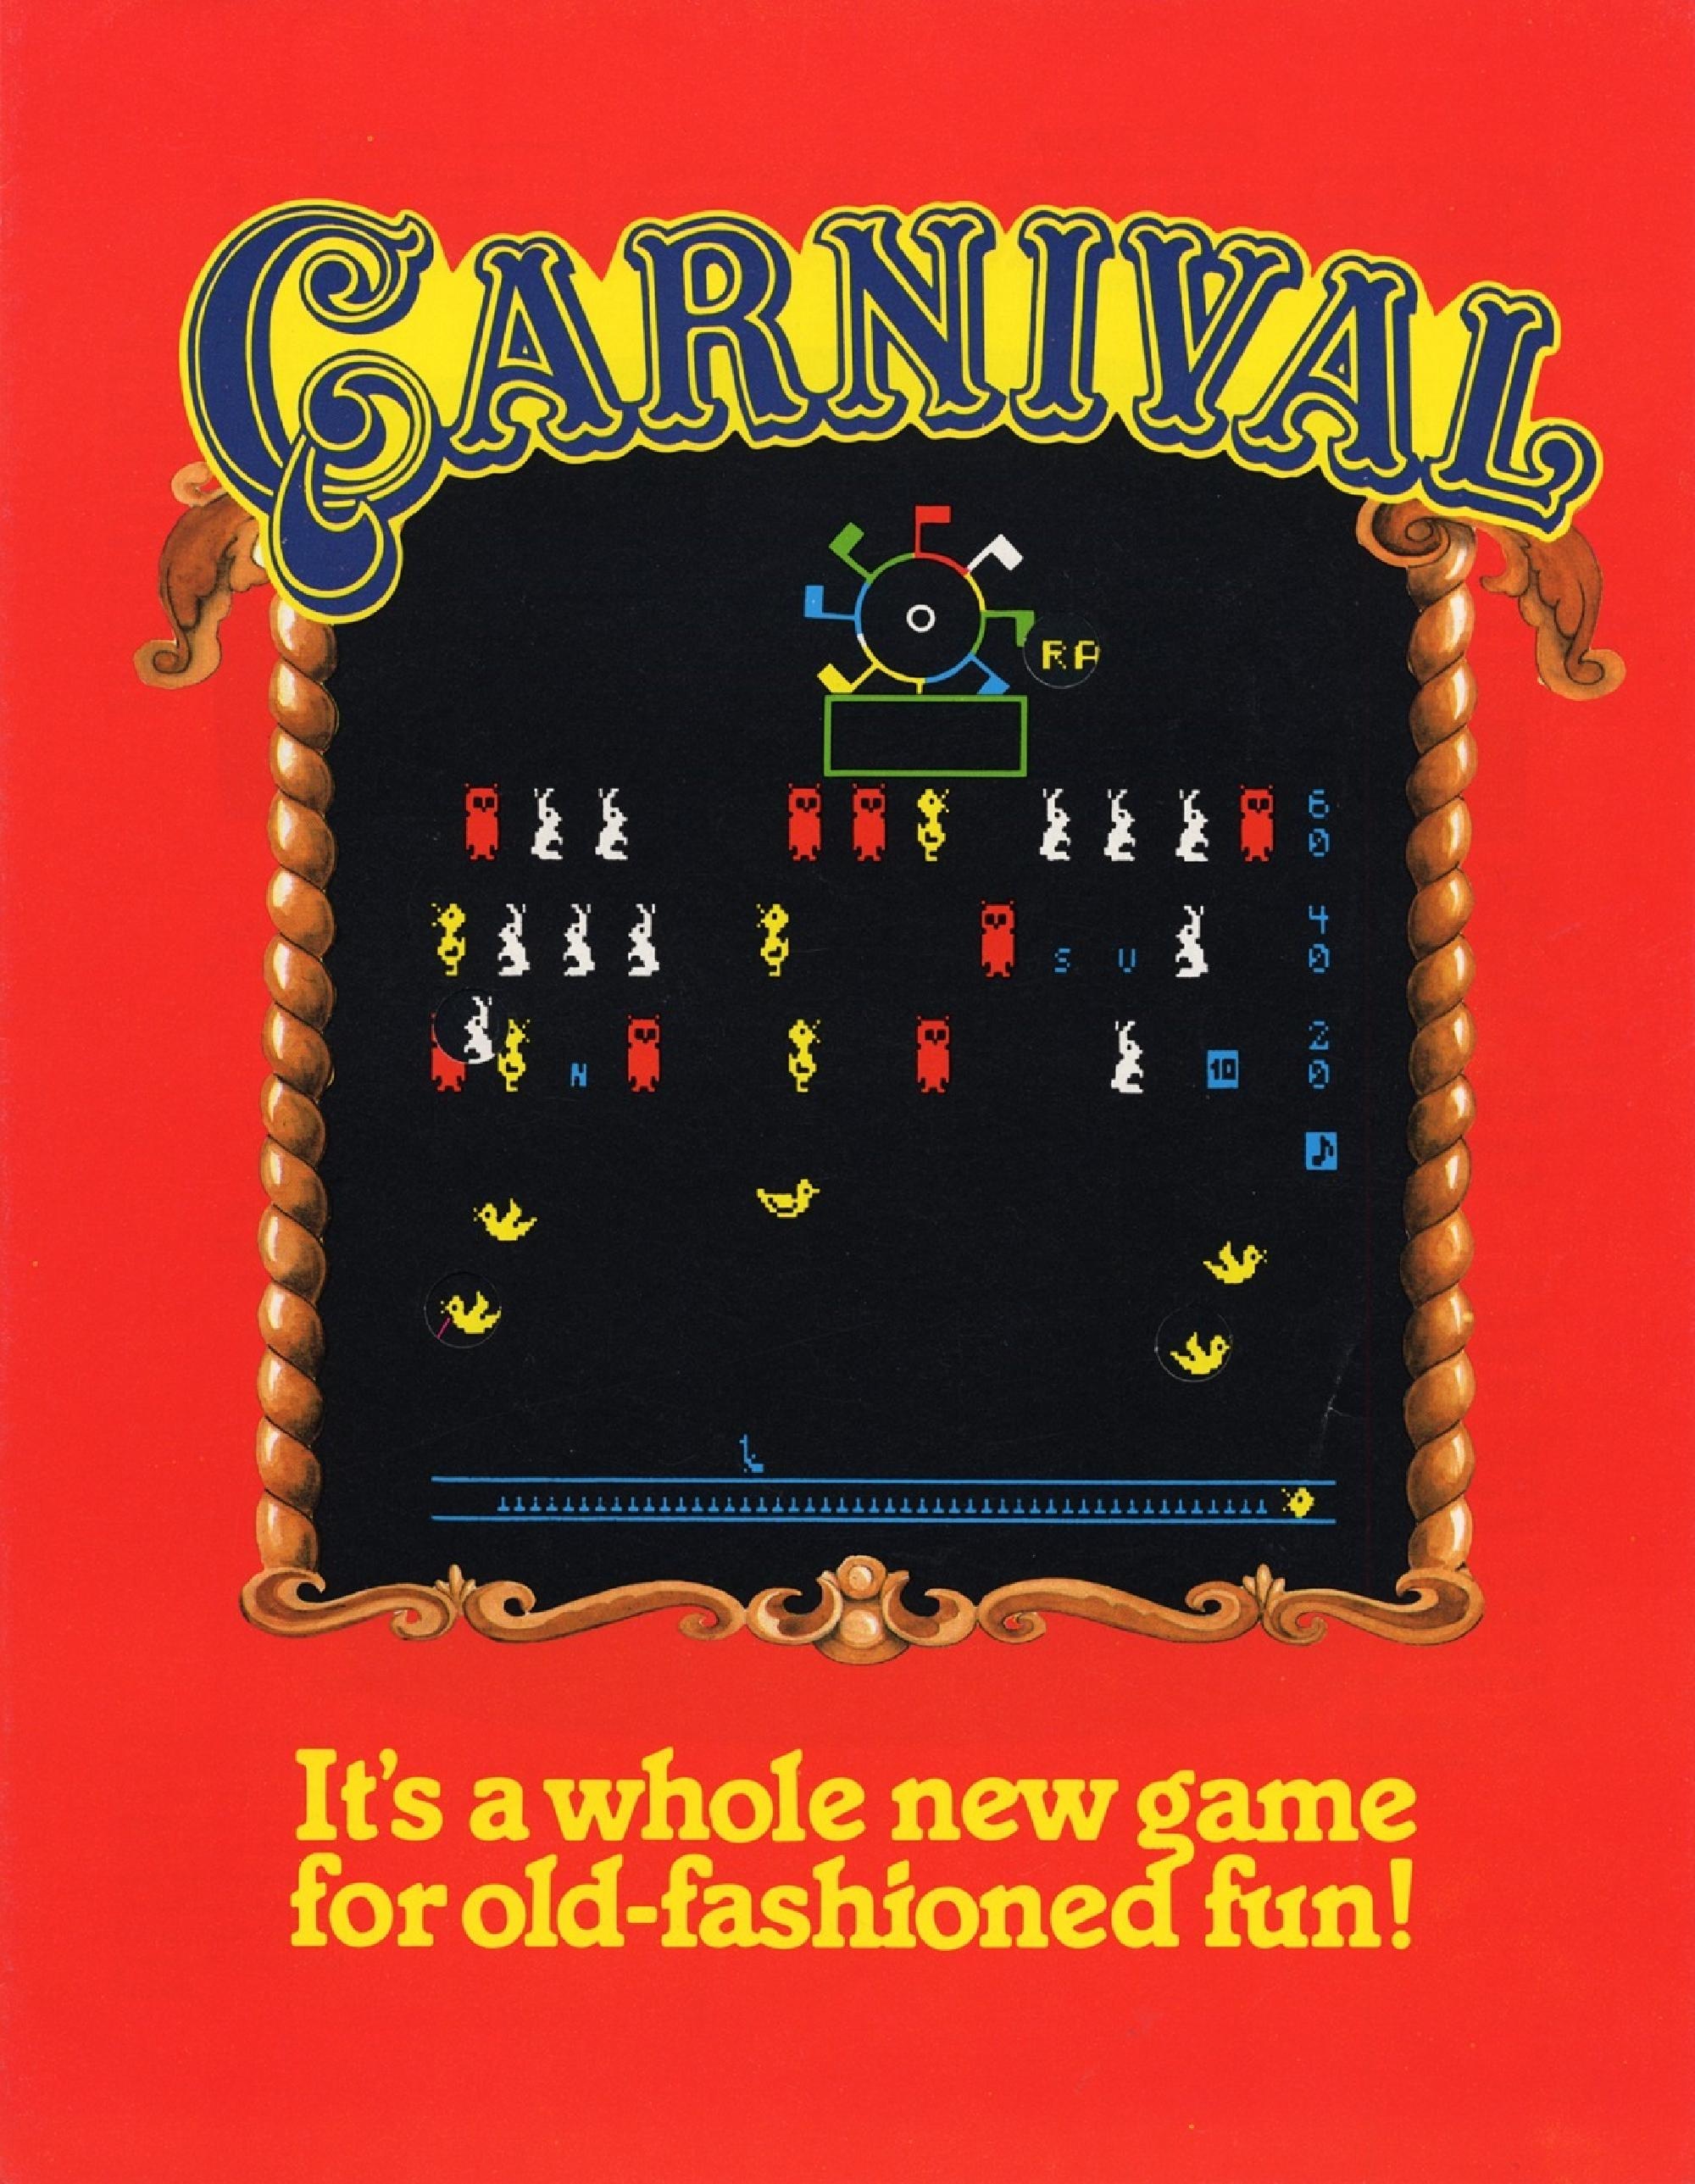 Carnival VICDual US Flyer.pdf